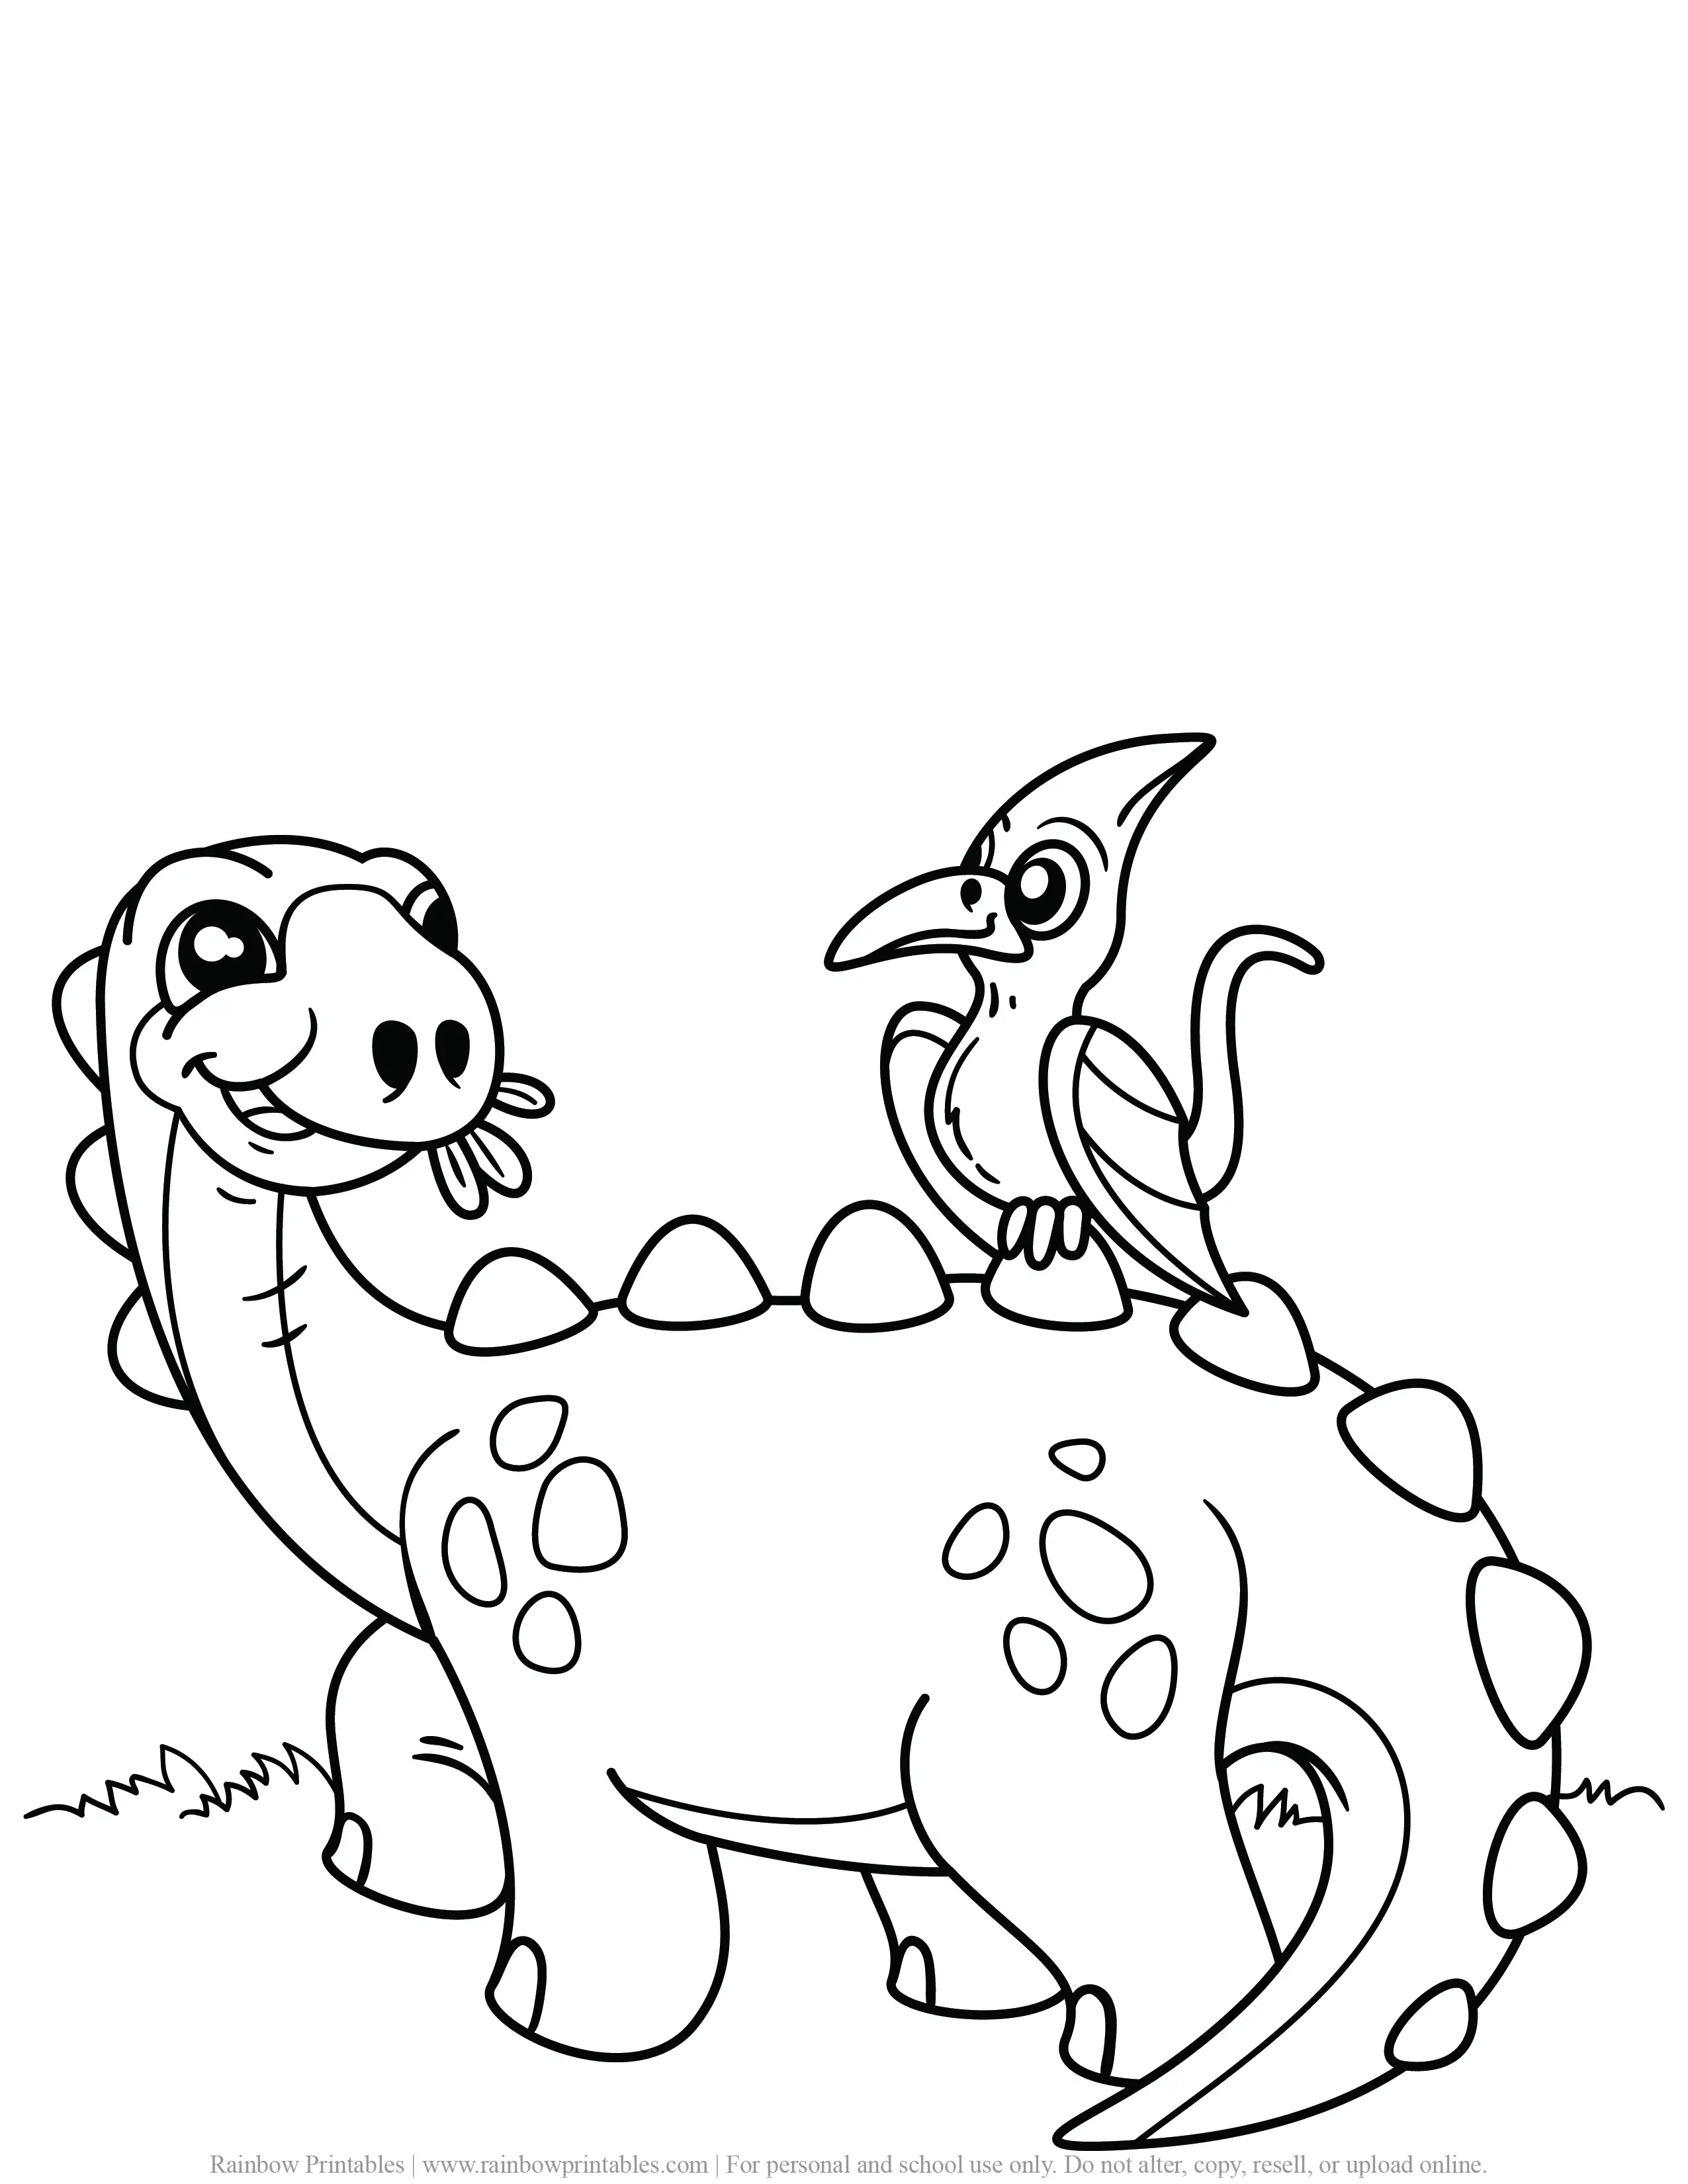 FREE DINOSAUR COLORING PAGES ACTIVITY FOR KIDS AND BOYS DINO DRAGON PRINTABLE-06